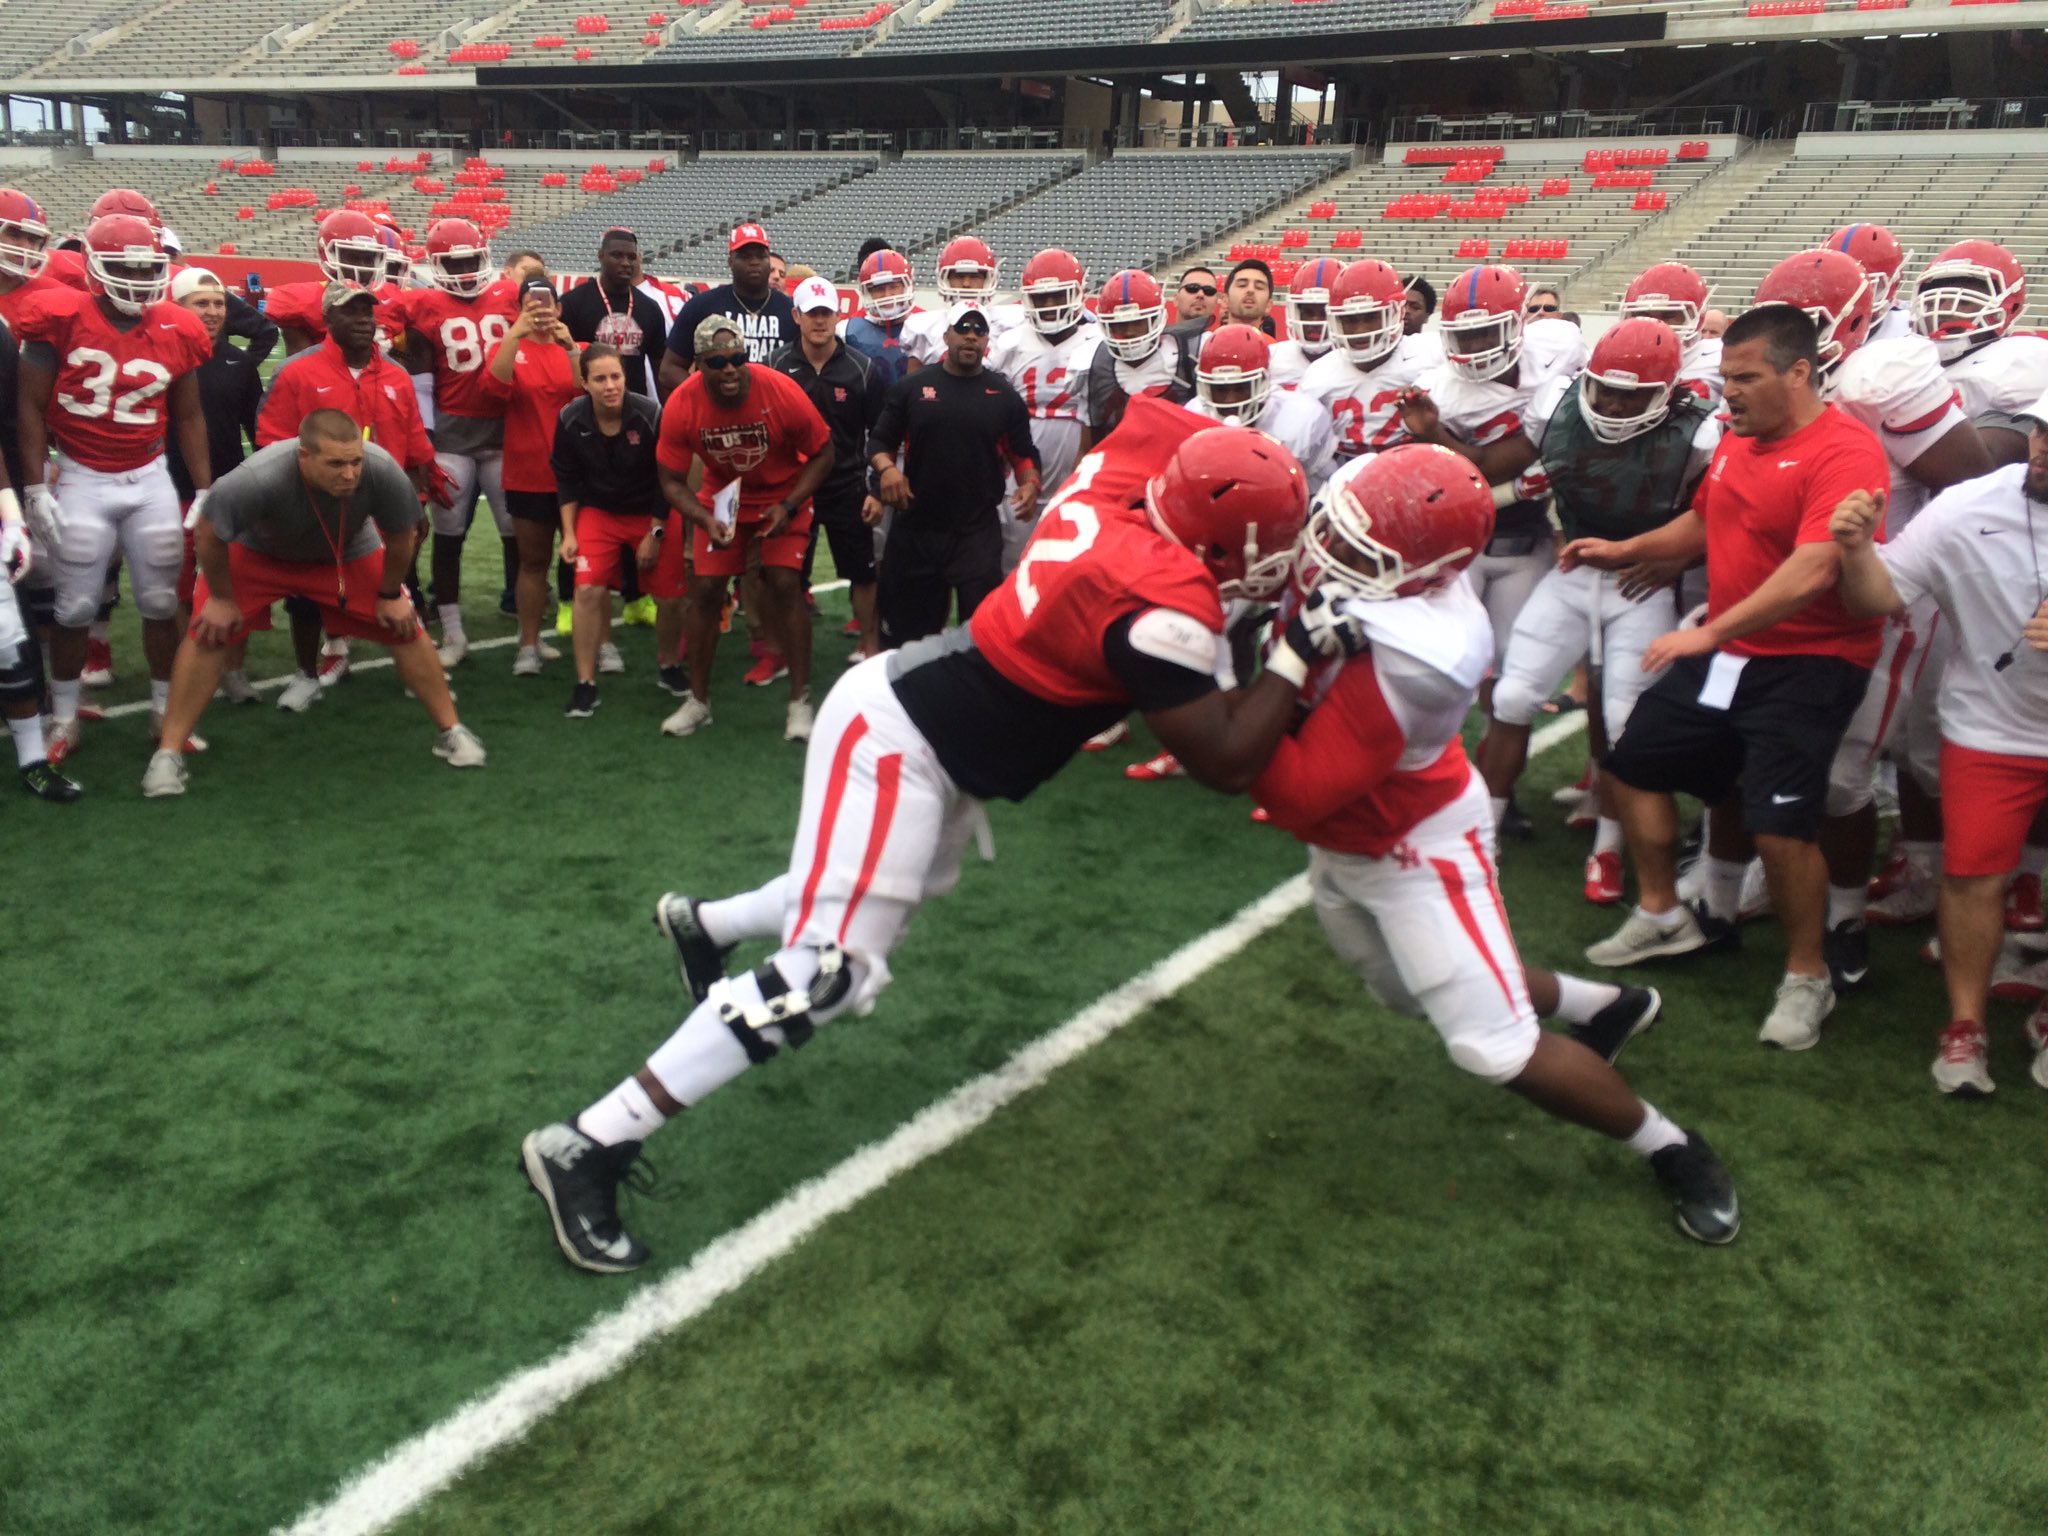 #HTownTakeover on Twitter: "Circle drill in full effect. First spring scrimmage about to start ...